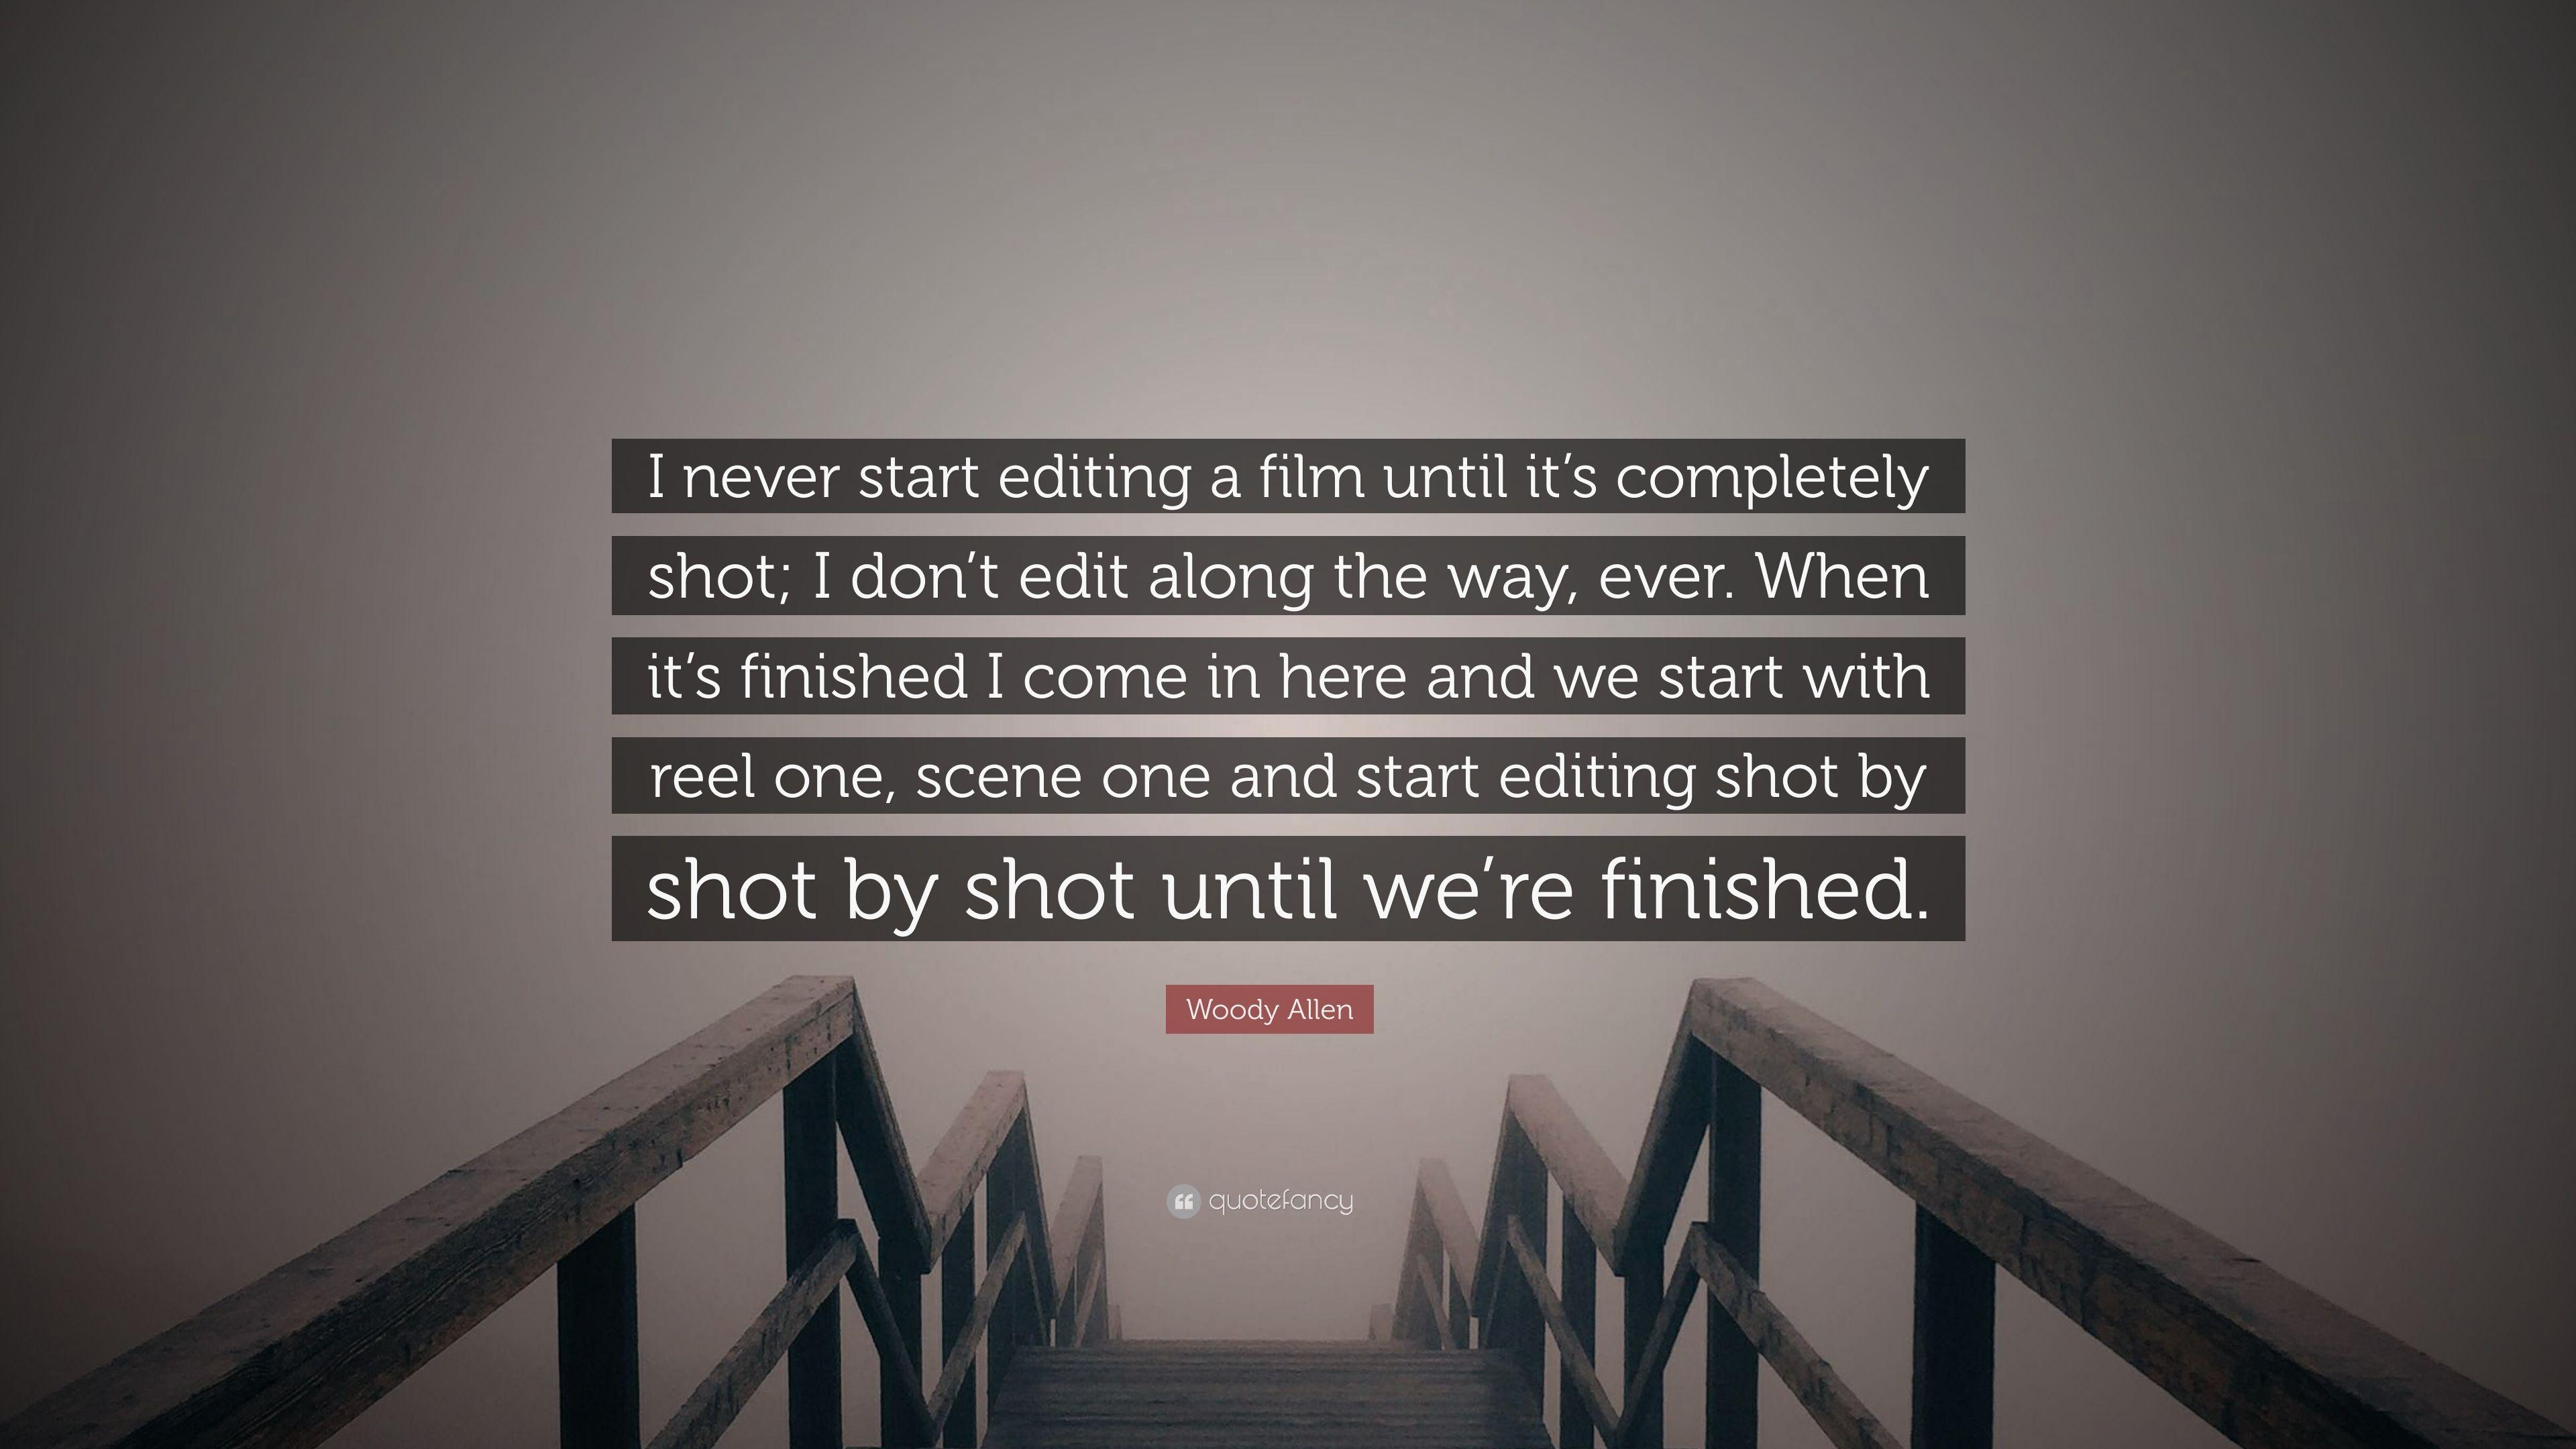 Woody Allen Quote: “I never start editing a film until it's